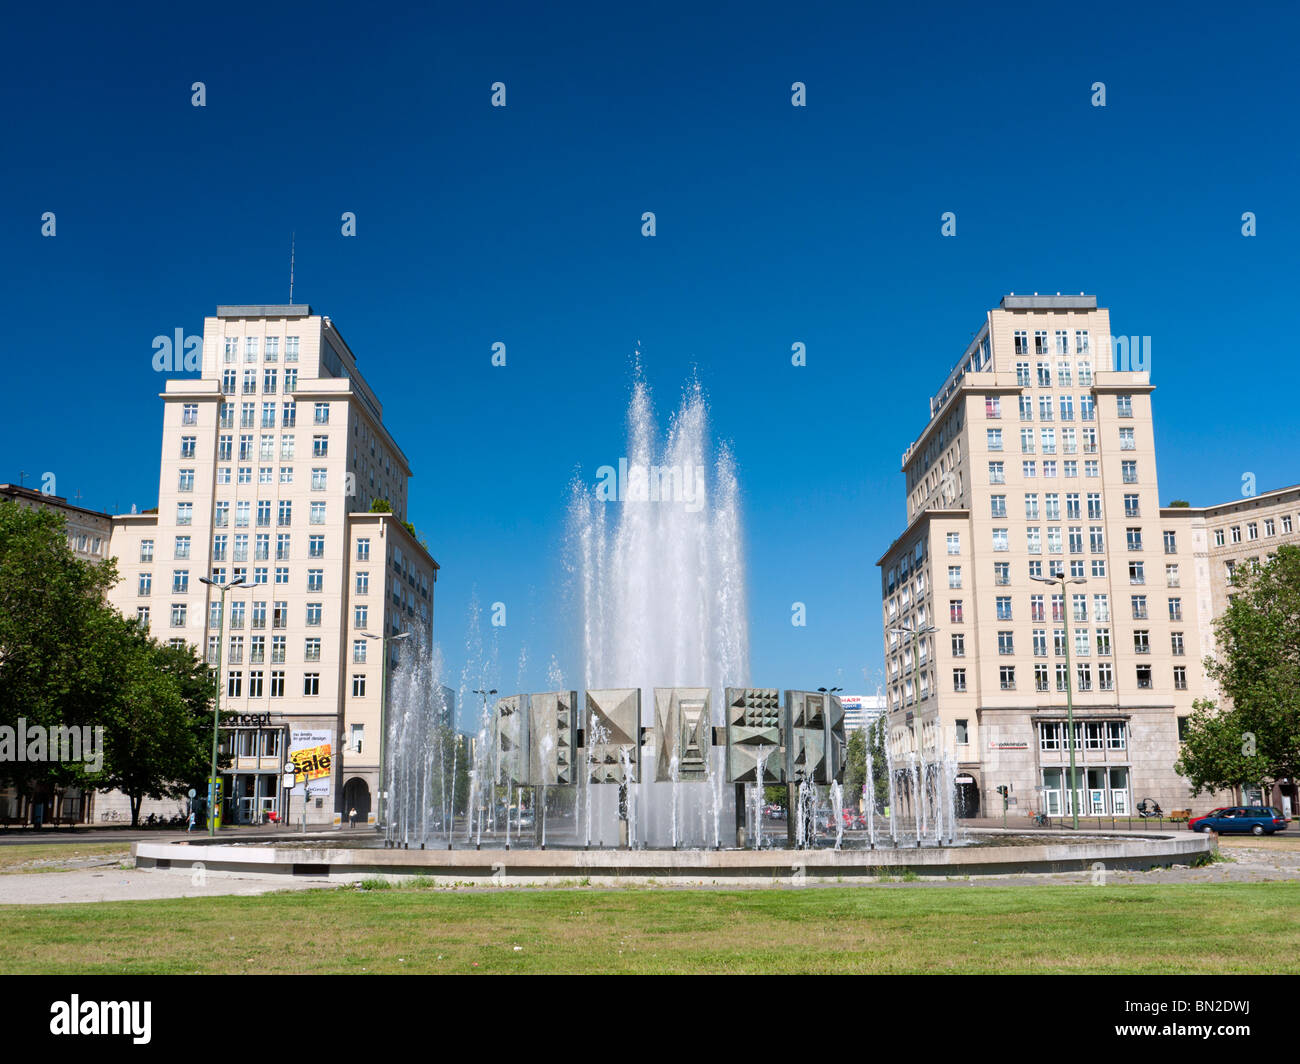 DDR era Fountain at Strausberger Platz on Karl Marx Allee in former East Berlin Germany Stock Photo